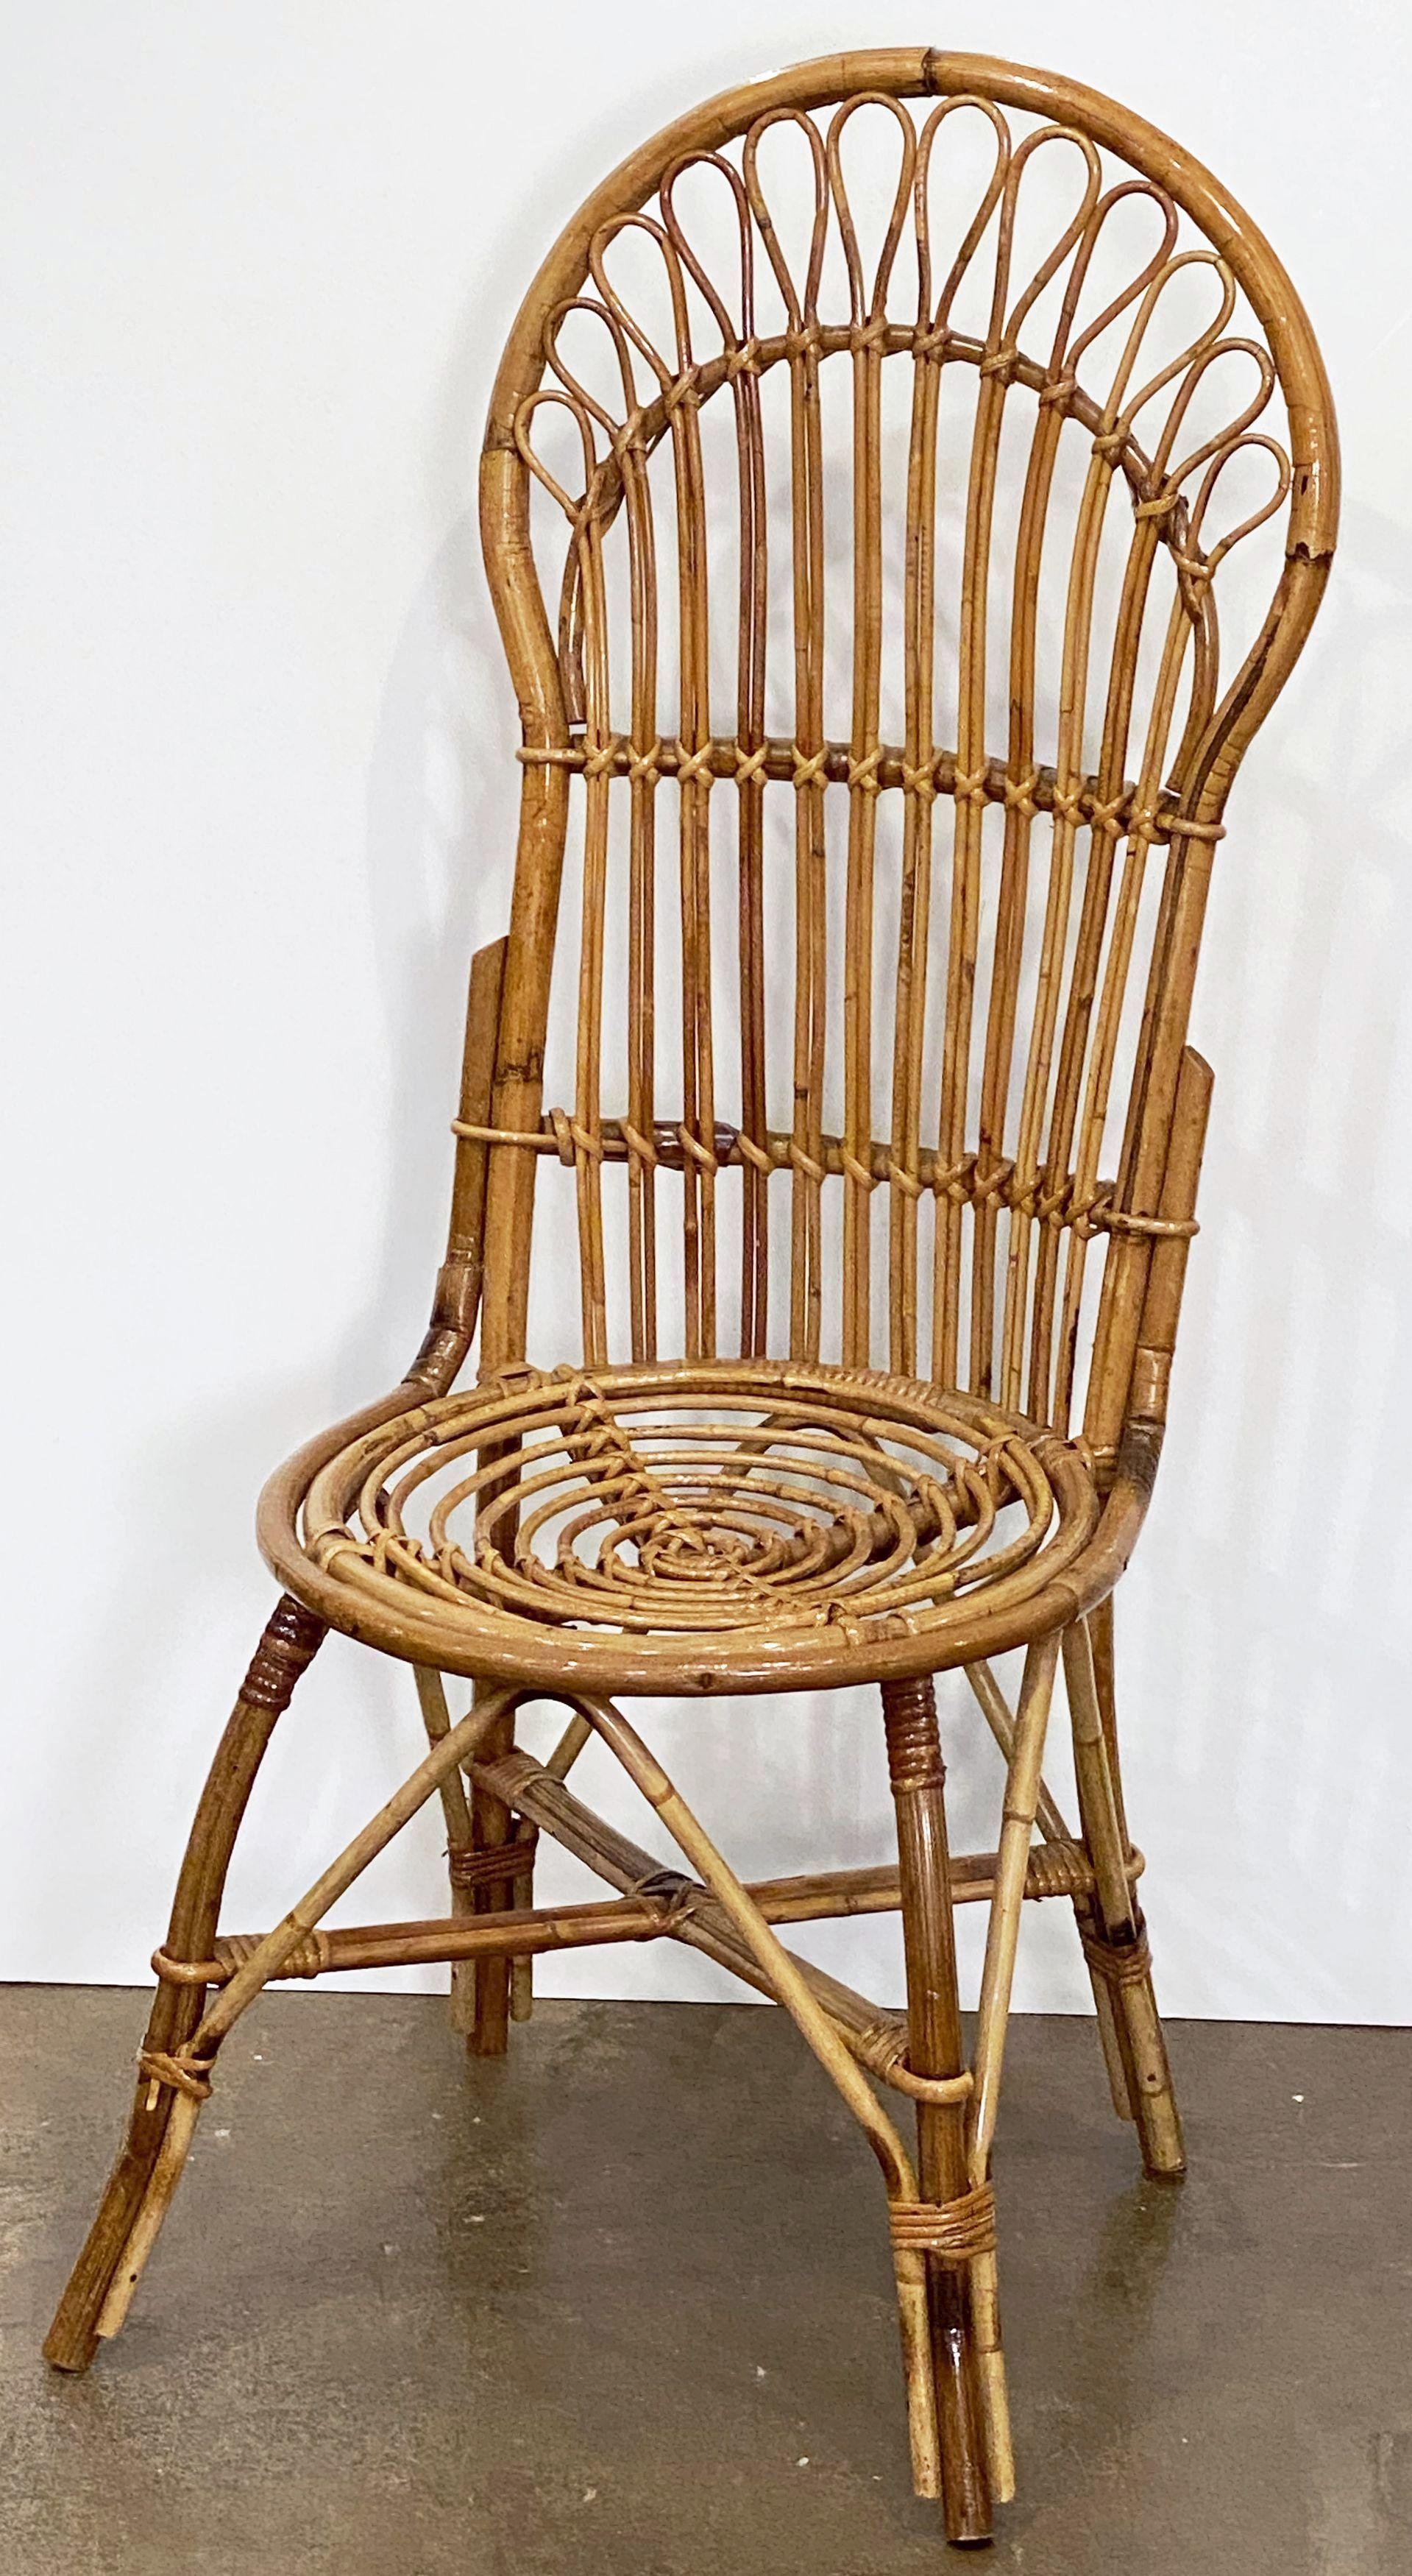 Italian Fan-Backed Chair of Rattan and Bamboo from the Mid-20th Century For Sale 14